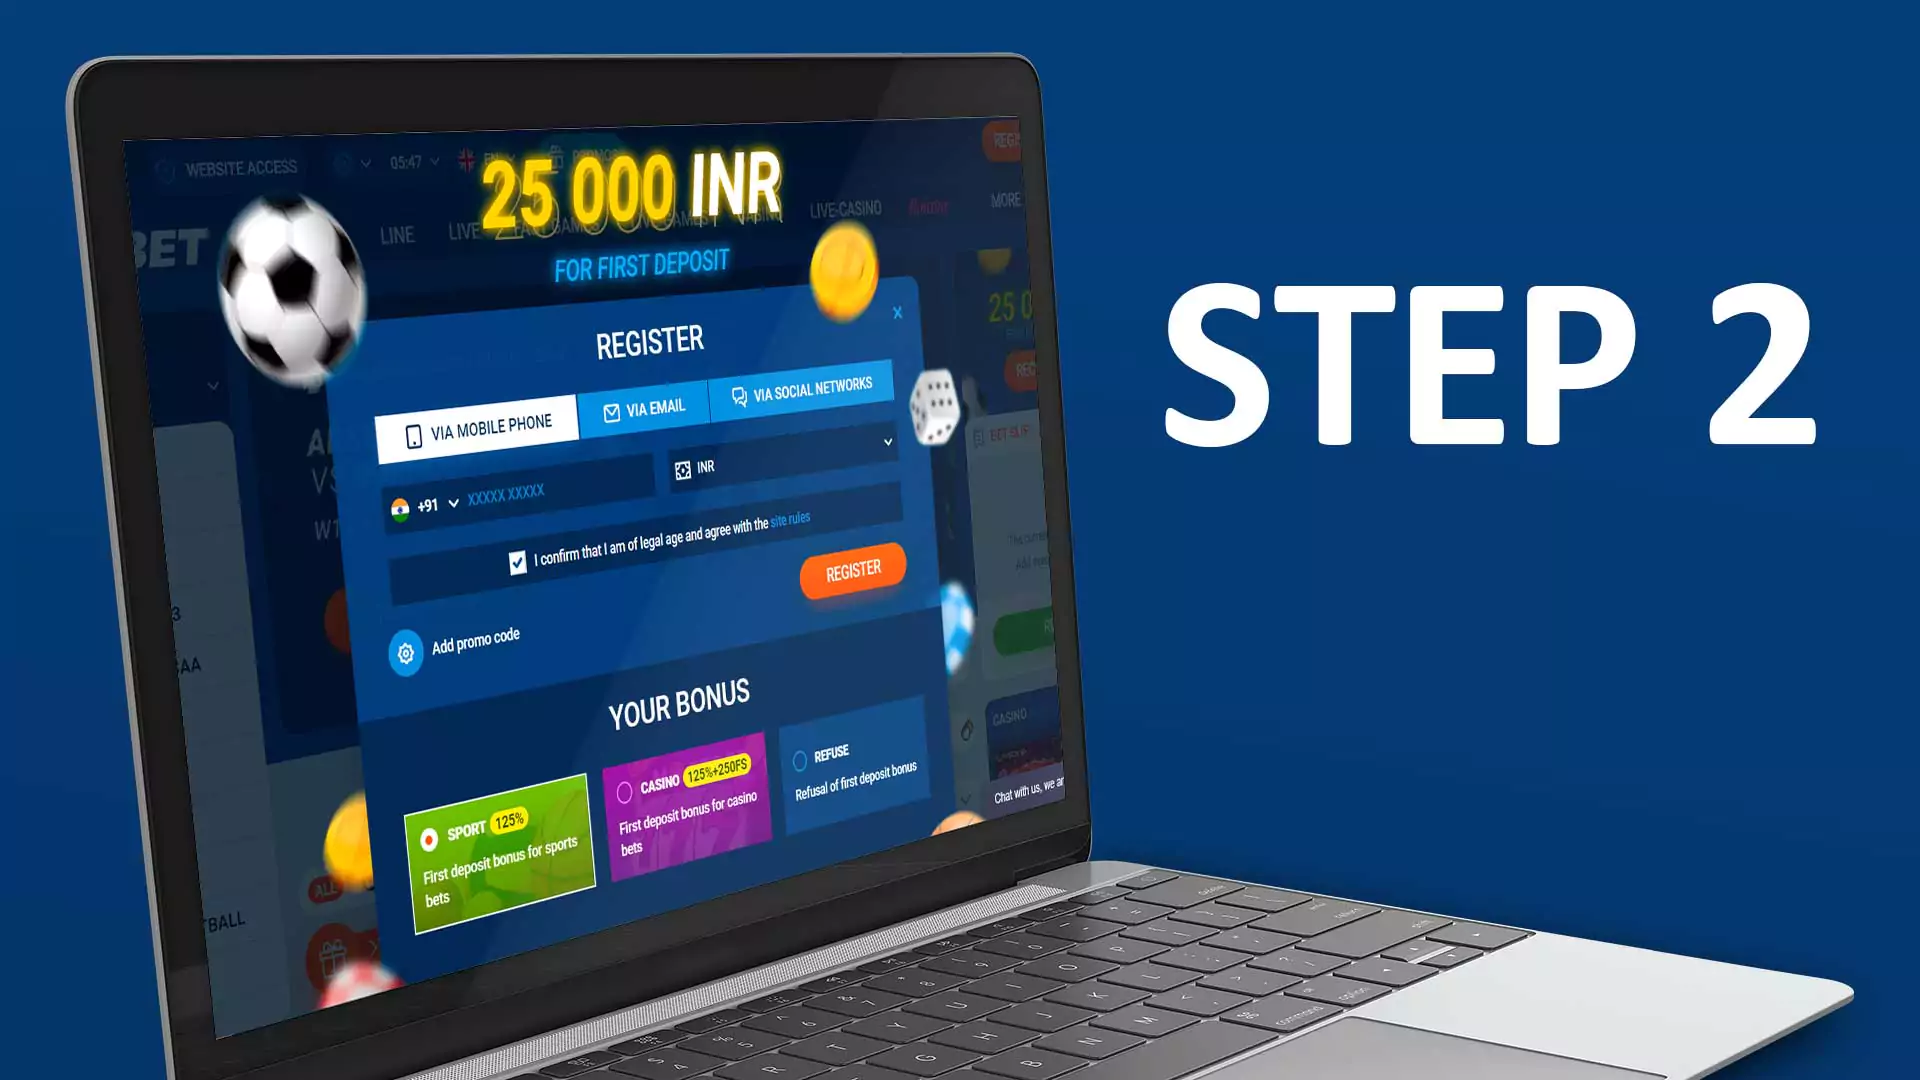 Start sign up a new account at Mostbet.